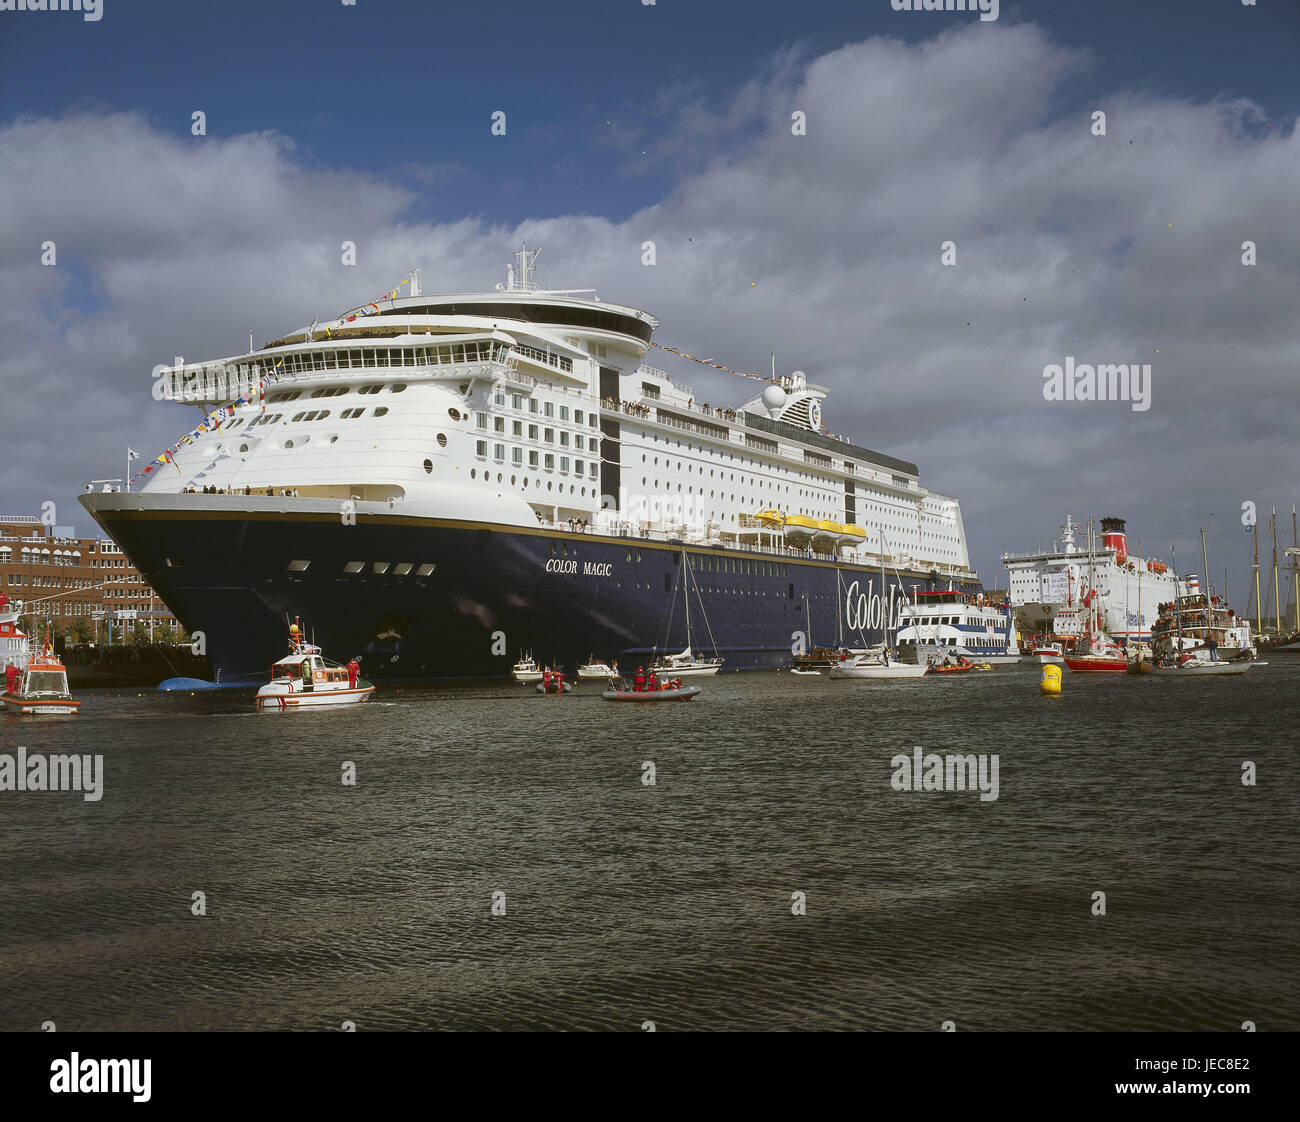 Germany, Schleswig - Holstein, Kiel, harbour, passenger liners, boats, North Germany, the Baltic Sea, harbour basin, cruise ships, ships, icon, navigation, navigation, vacation, cruise, Stock Photo